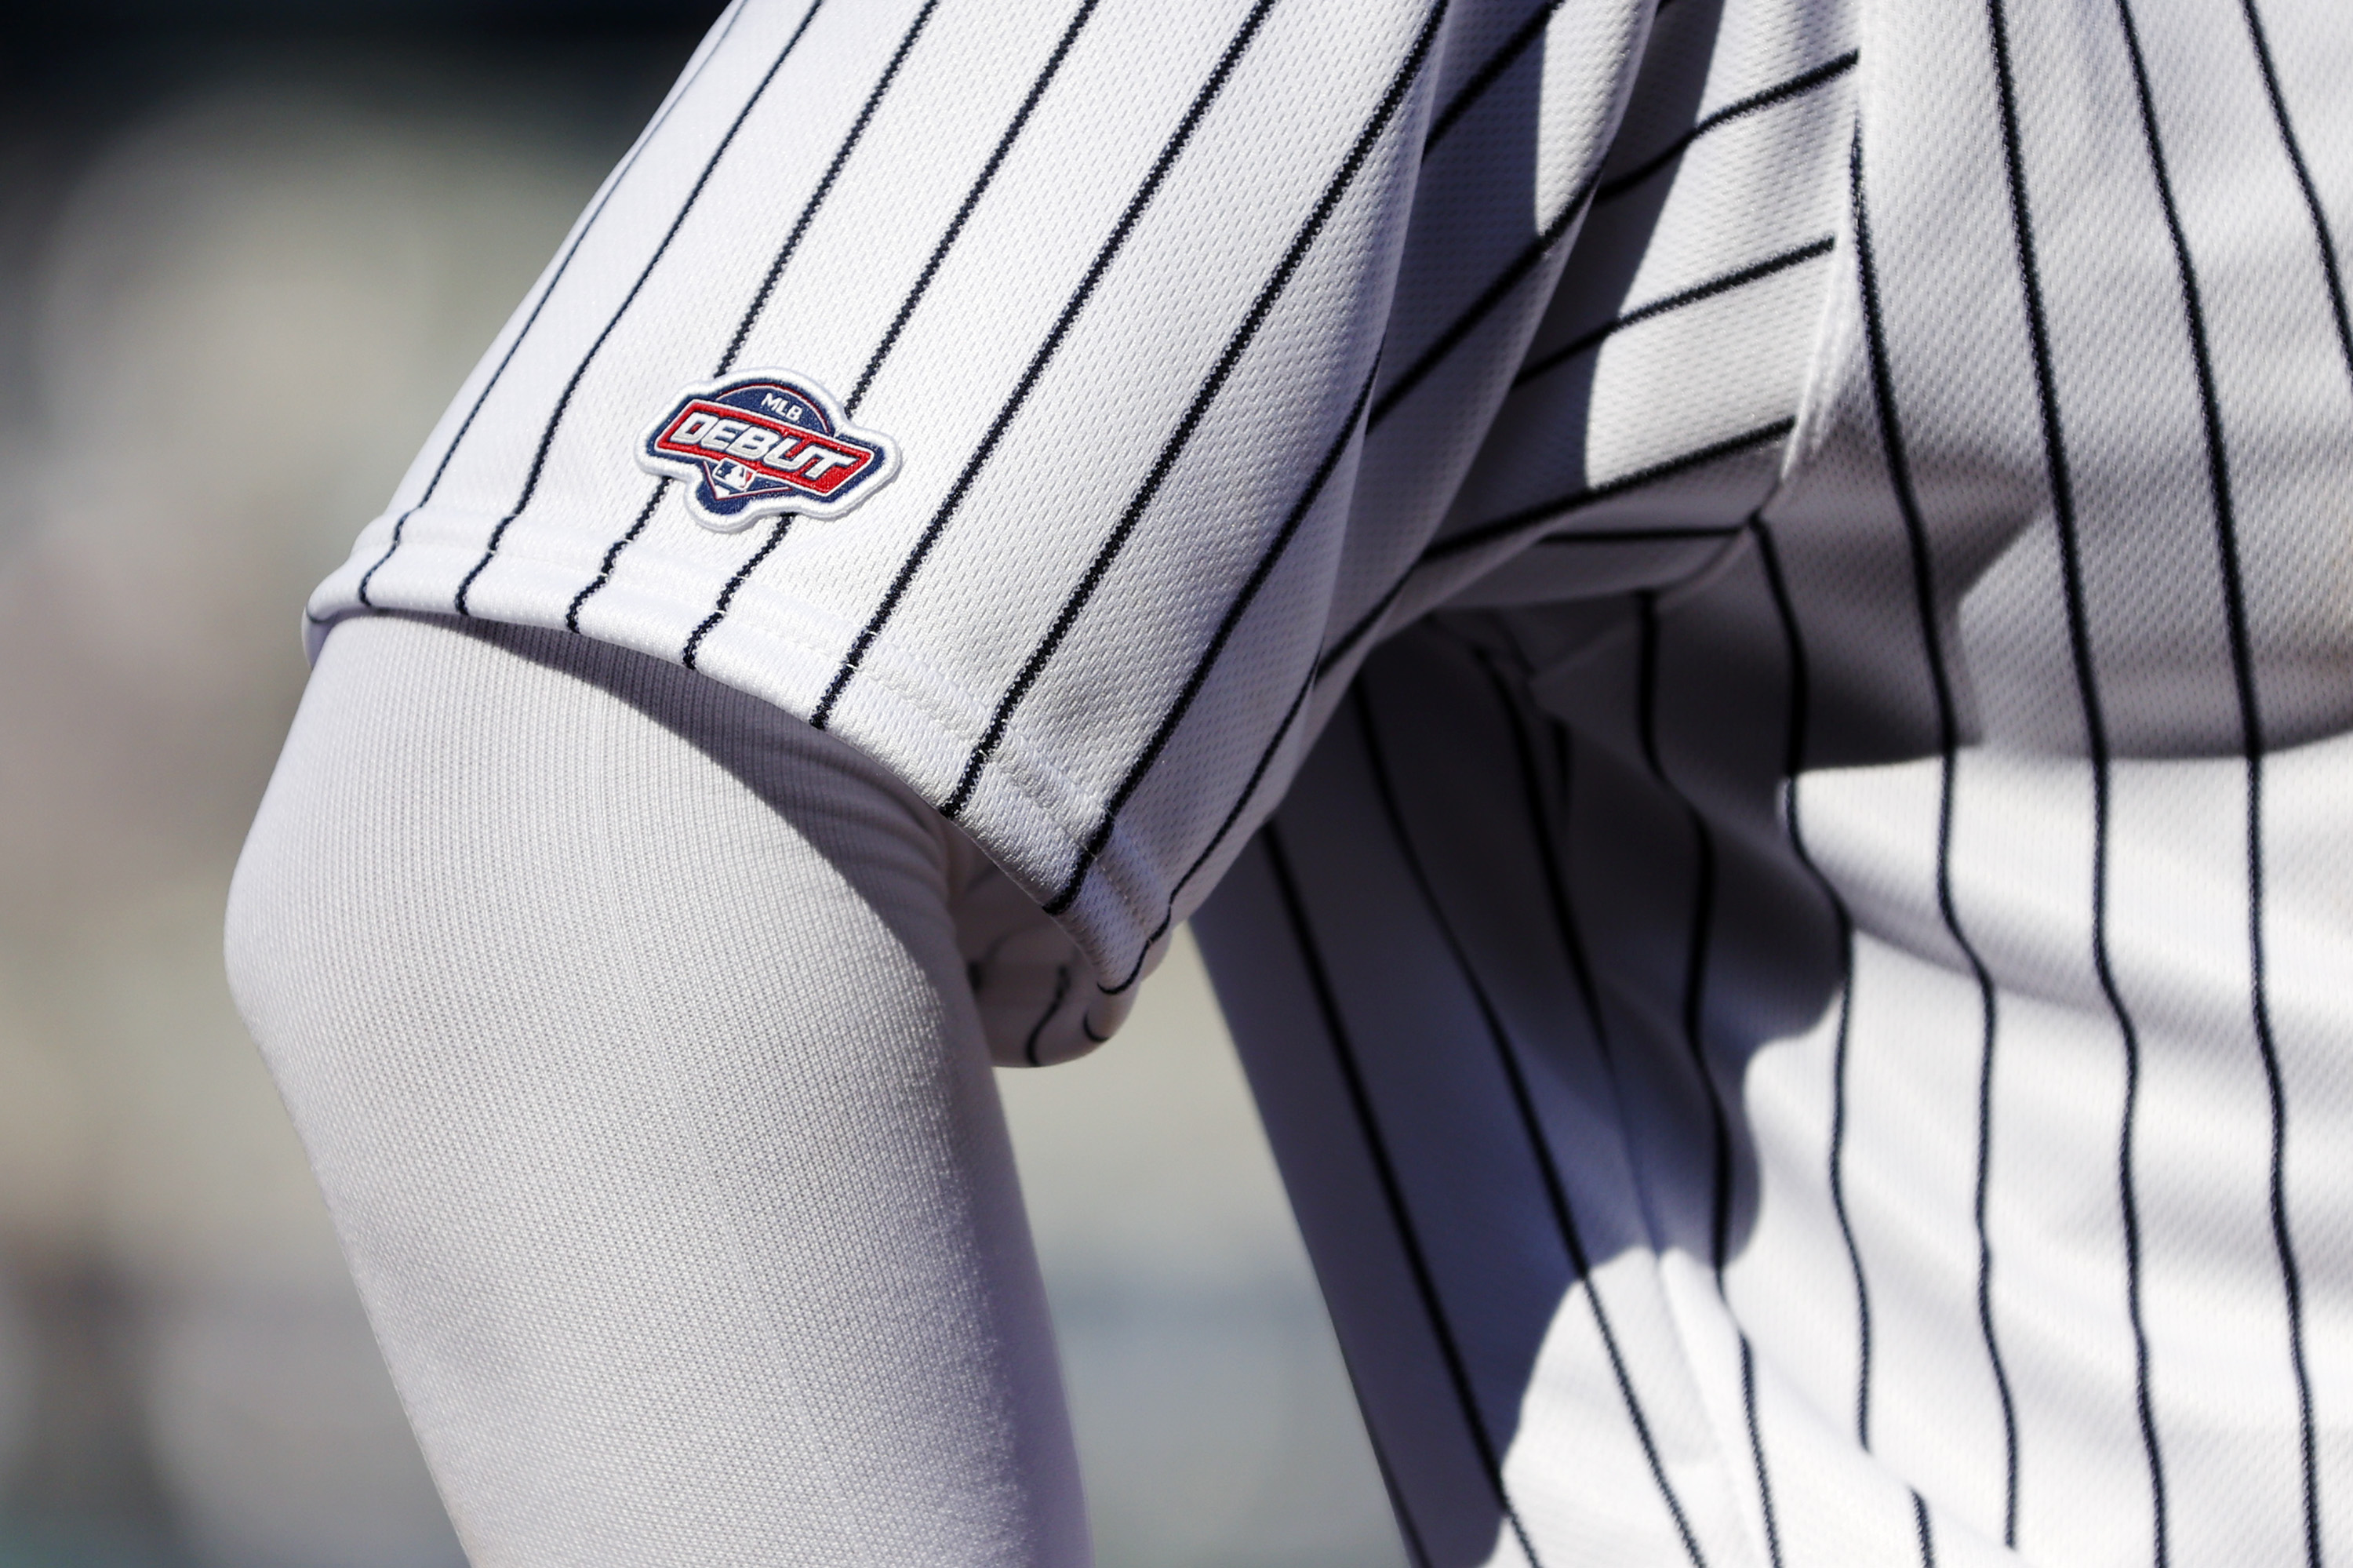 MLB debut players will have special patches on their jerseys - The